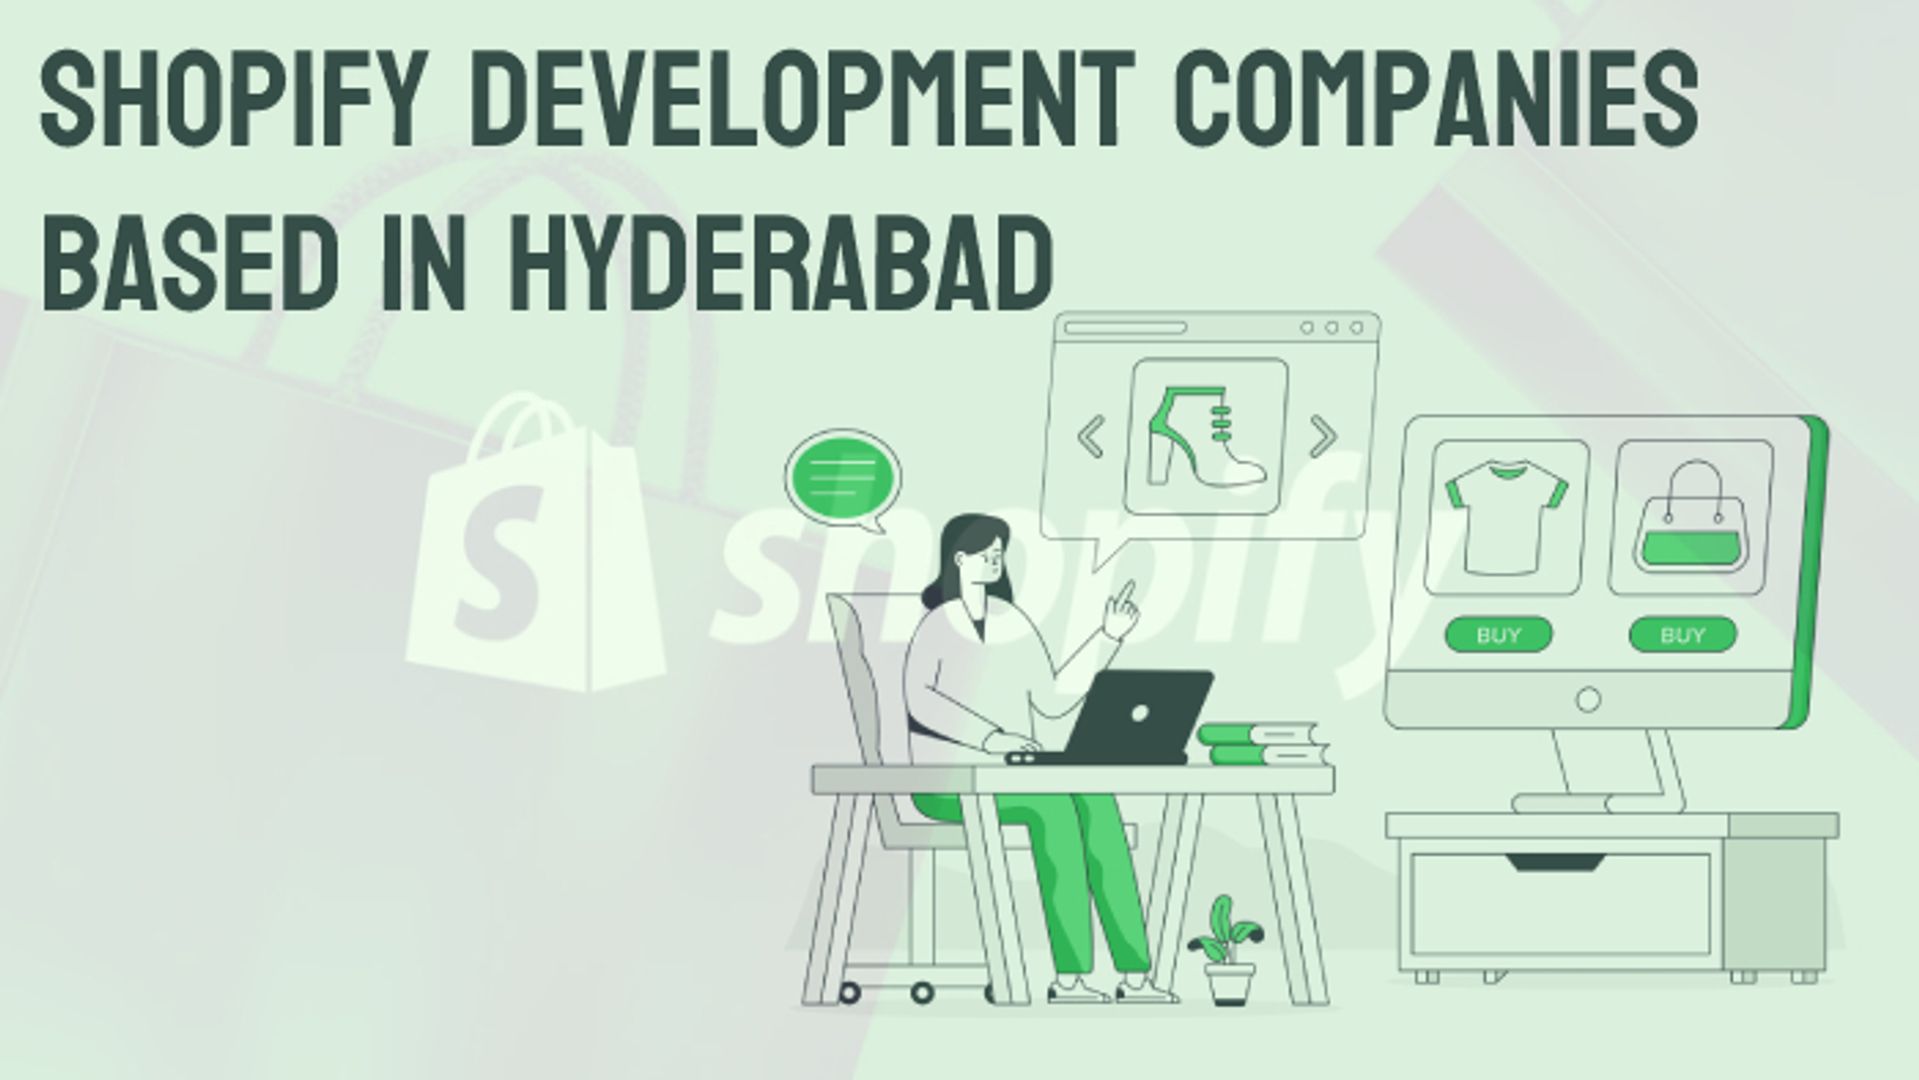 Shopify Development Companies Based In Hyderabad